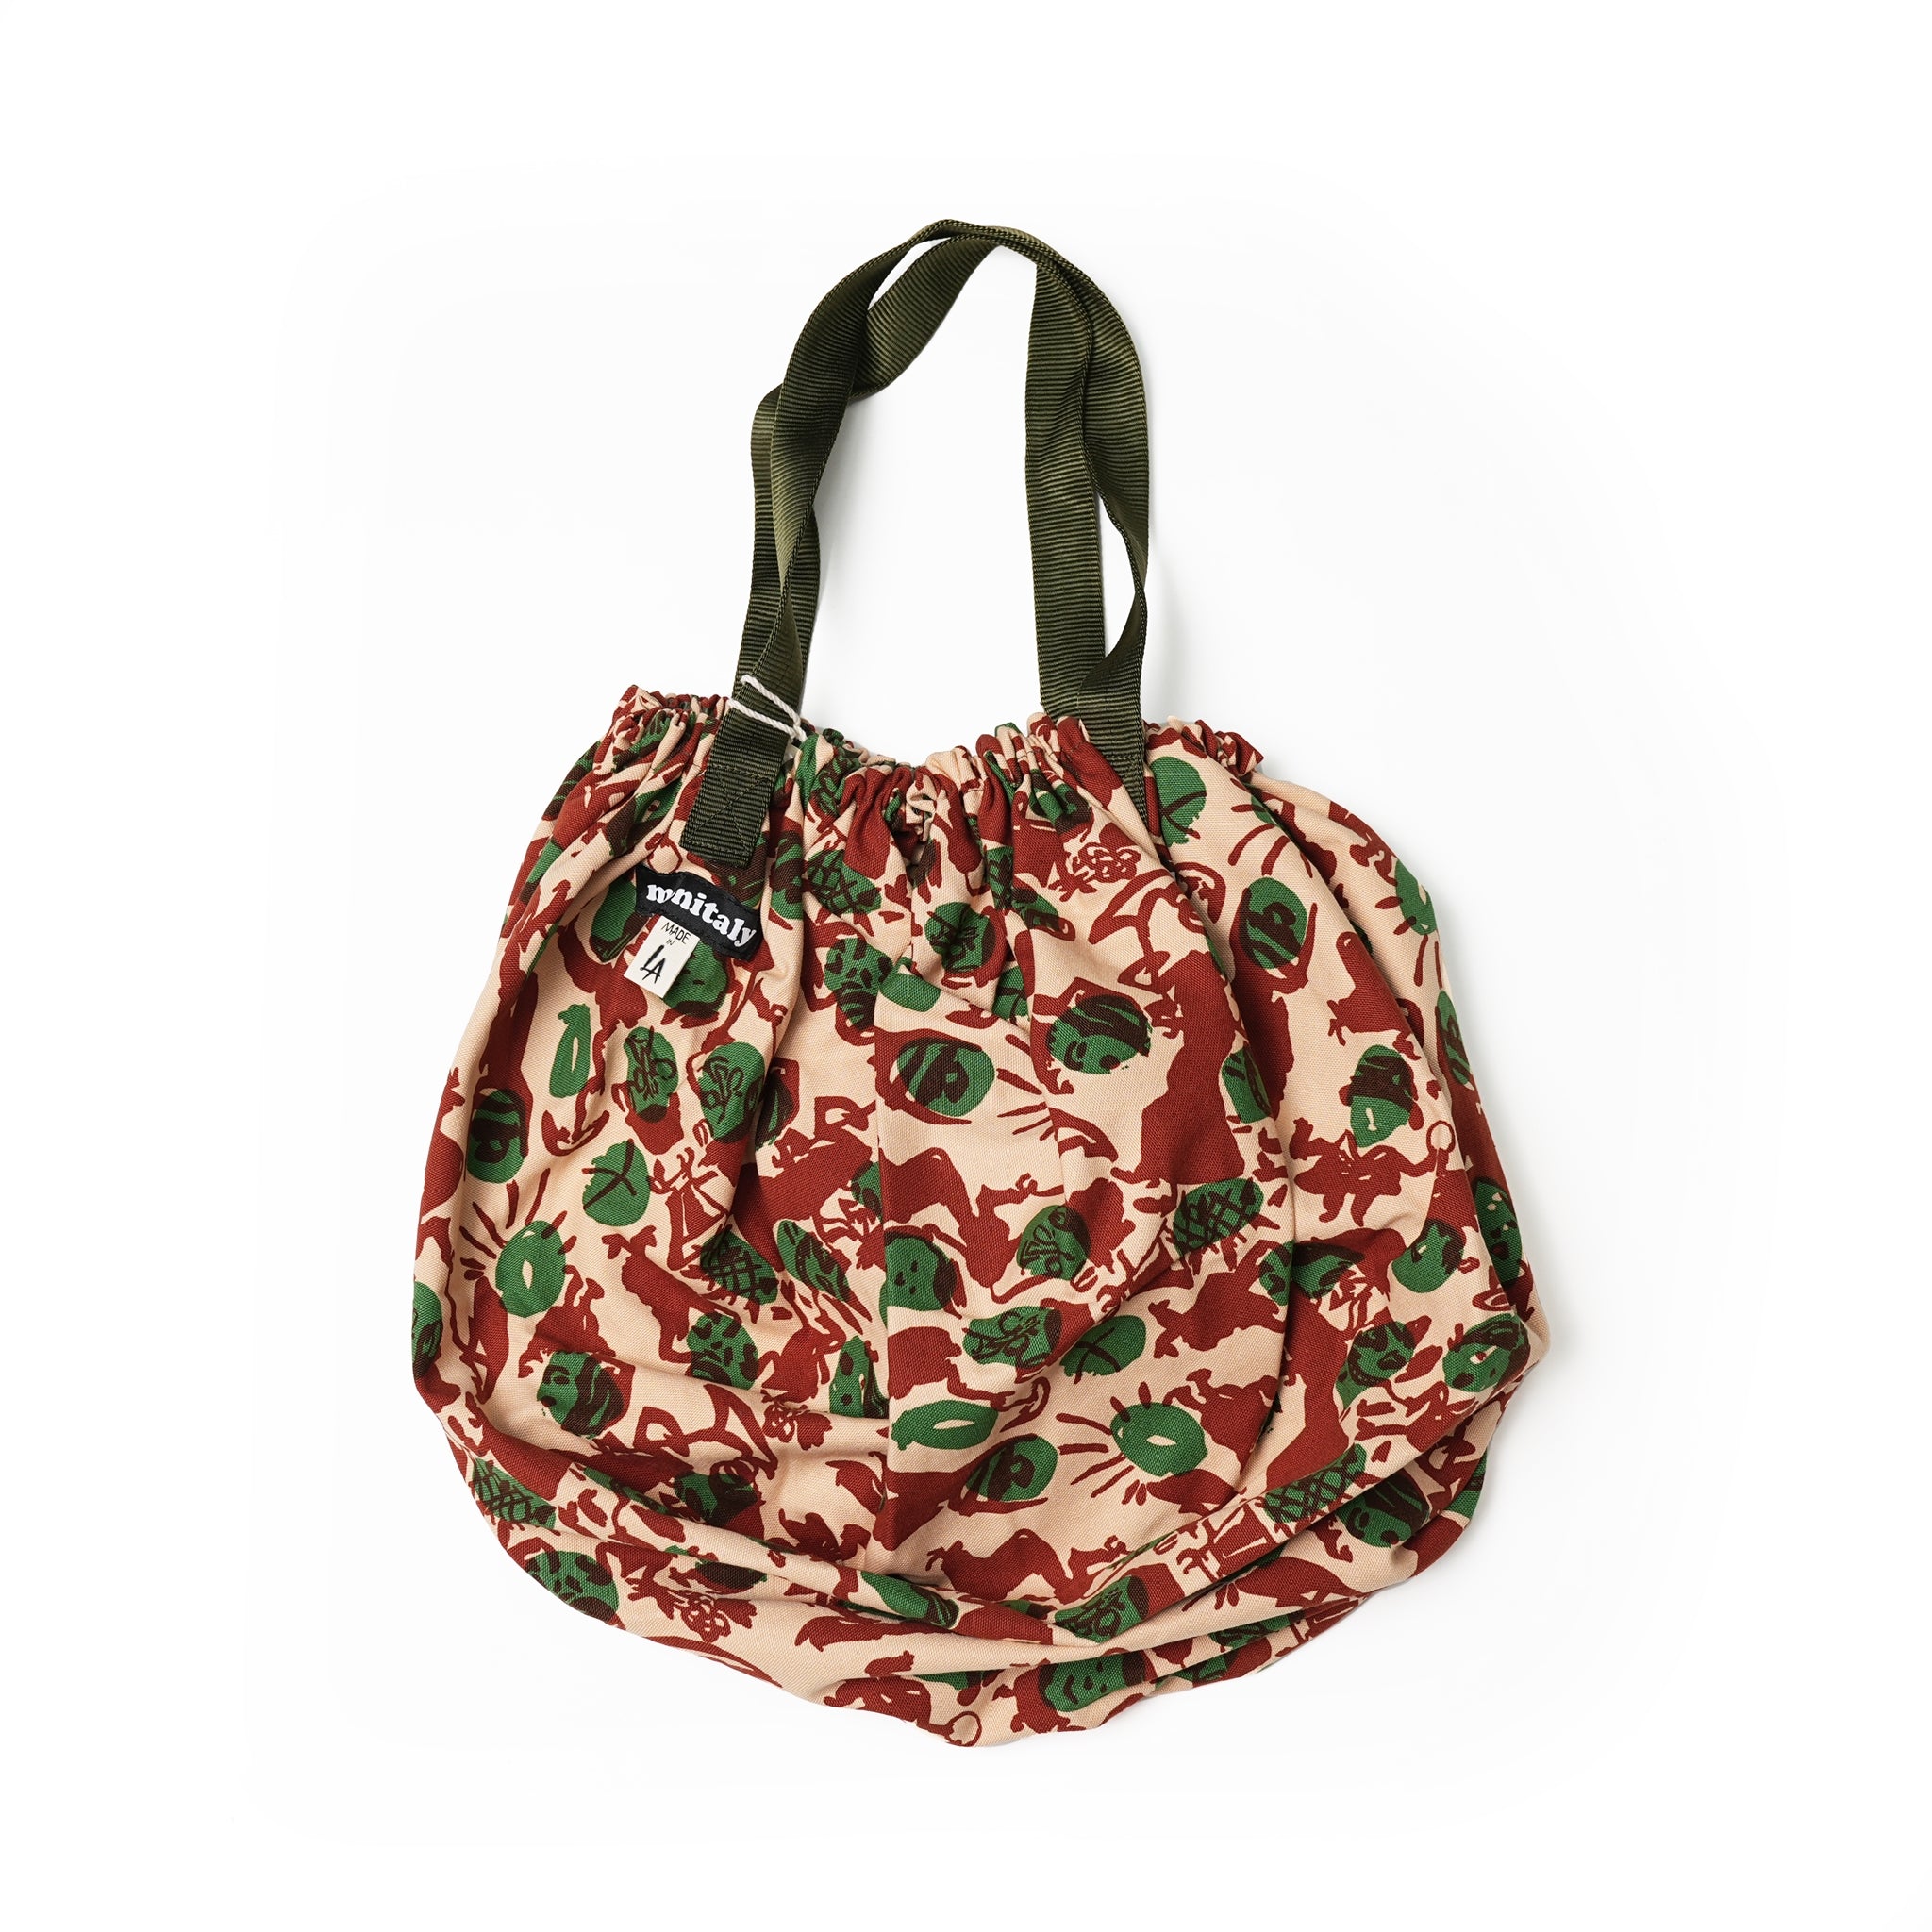 No:M32902-1 | Name:Gathering Bag | Color:Camo【MONITALY_モニタリー】【epperson mountaineering】